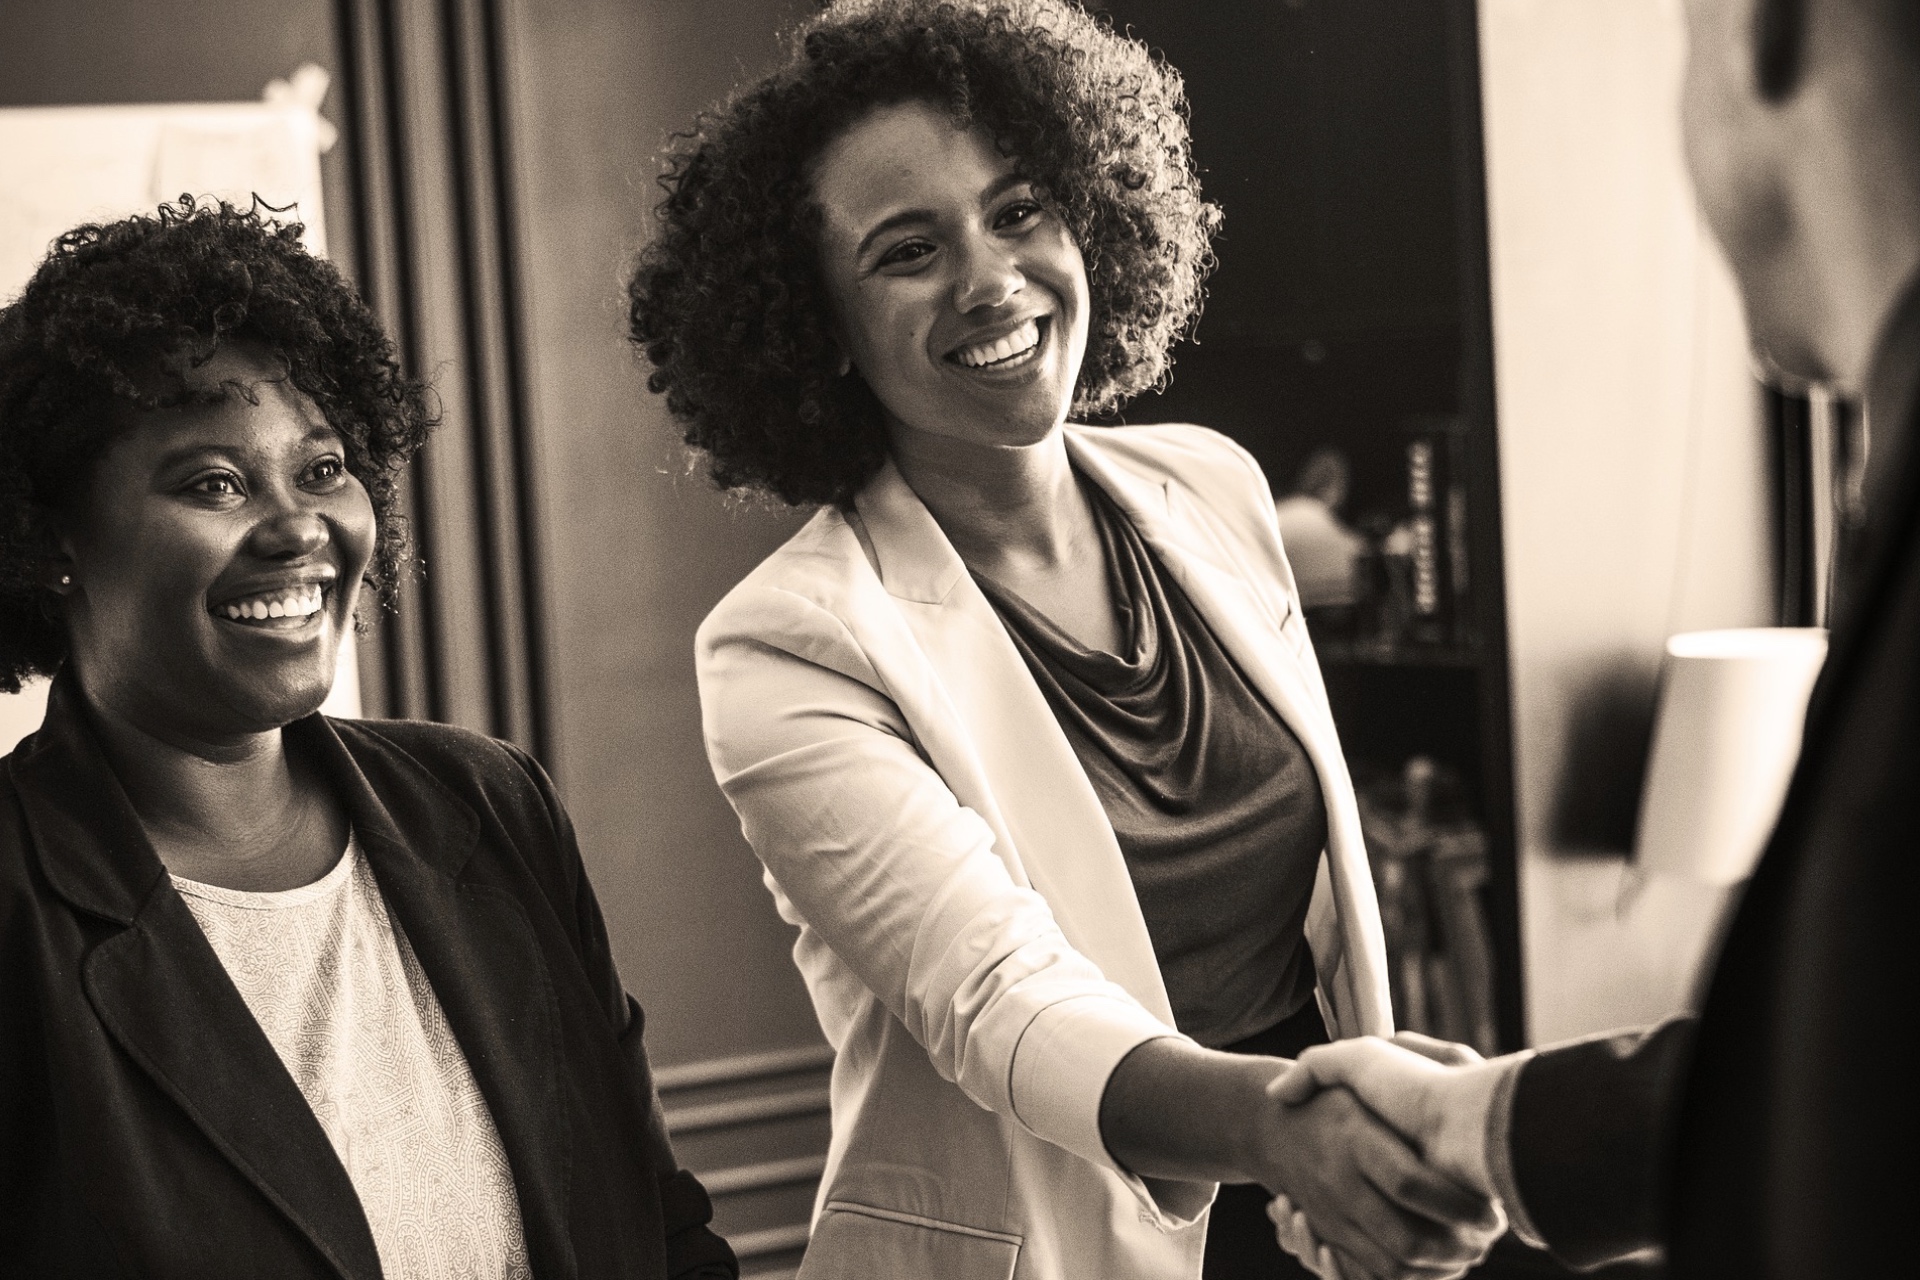 Black woman smiling, shaking hands with a man with another black woman standing next to her also smiling